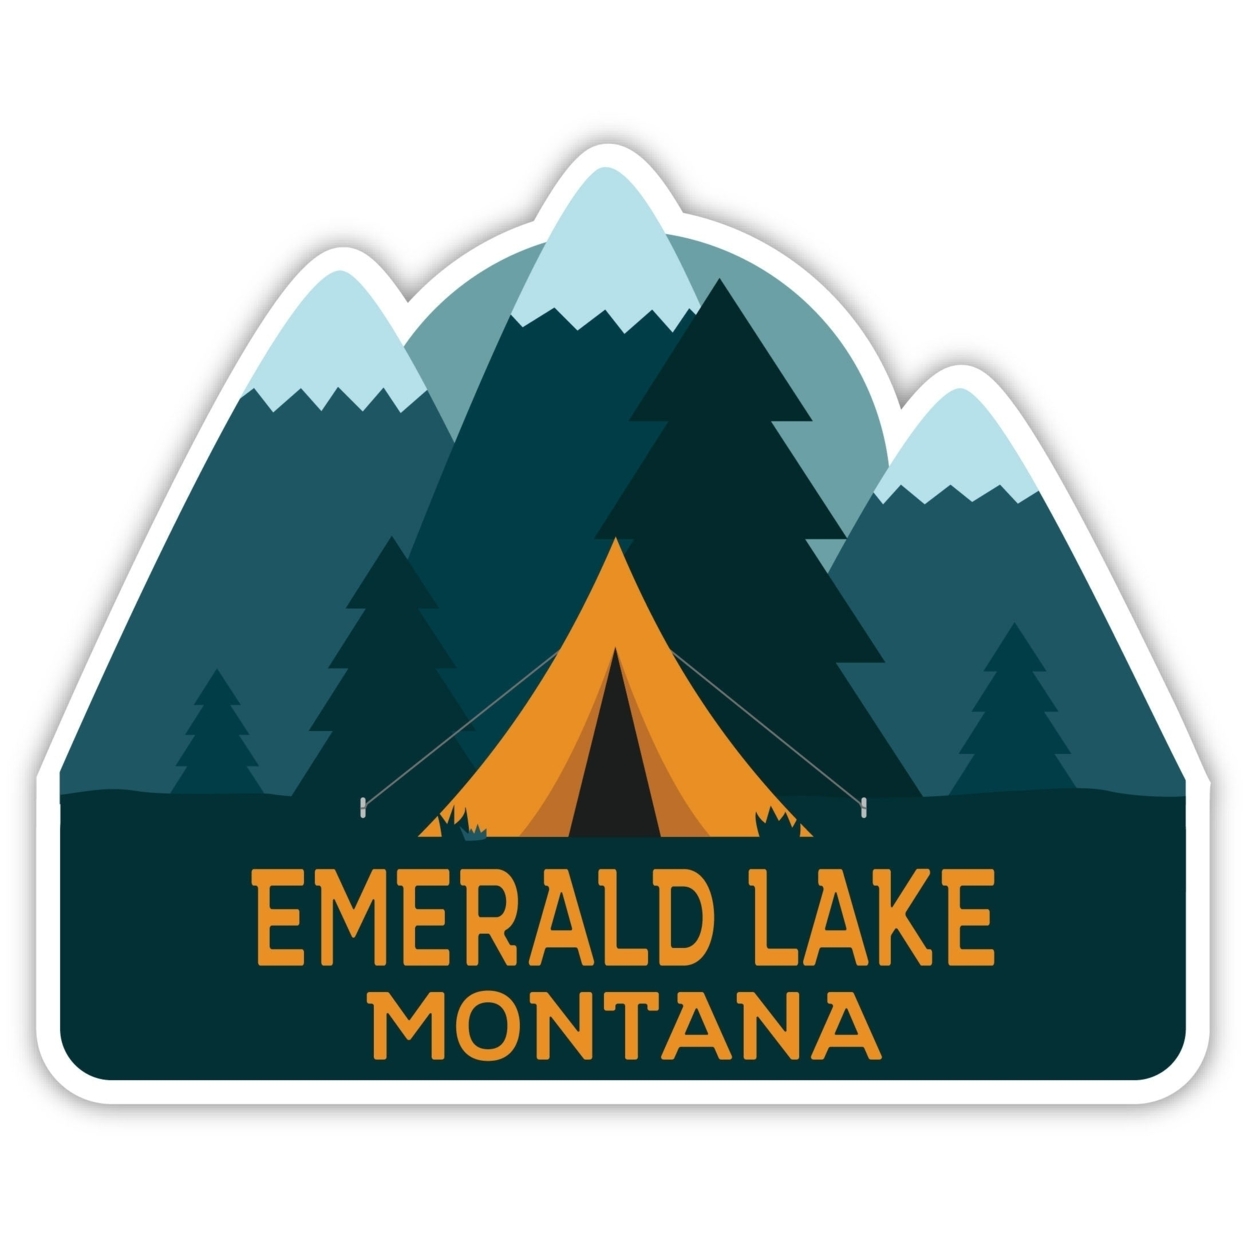 Emerald Lake Montana Souvenir Decorative Stickers (Choose Theme And Size) - 4-Pack, 4-Inch, Tent